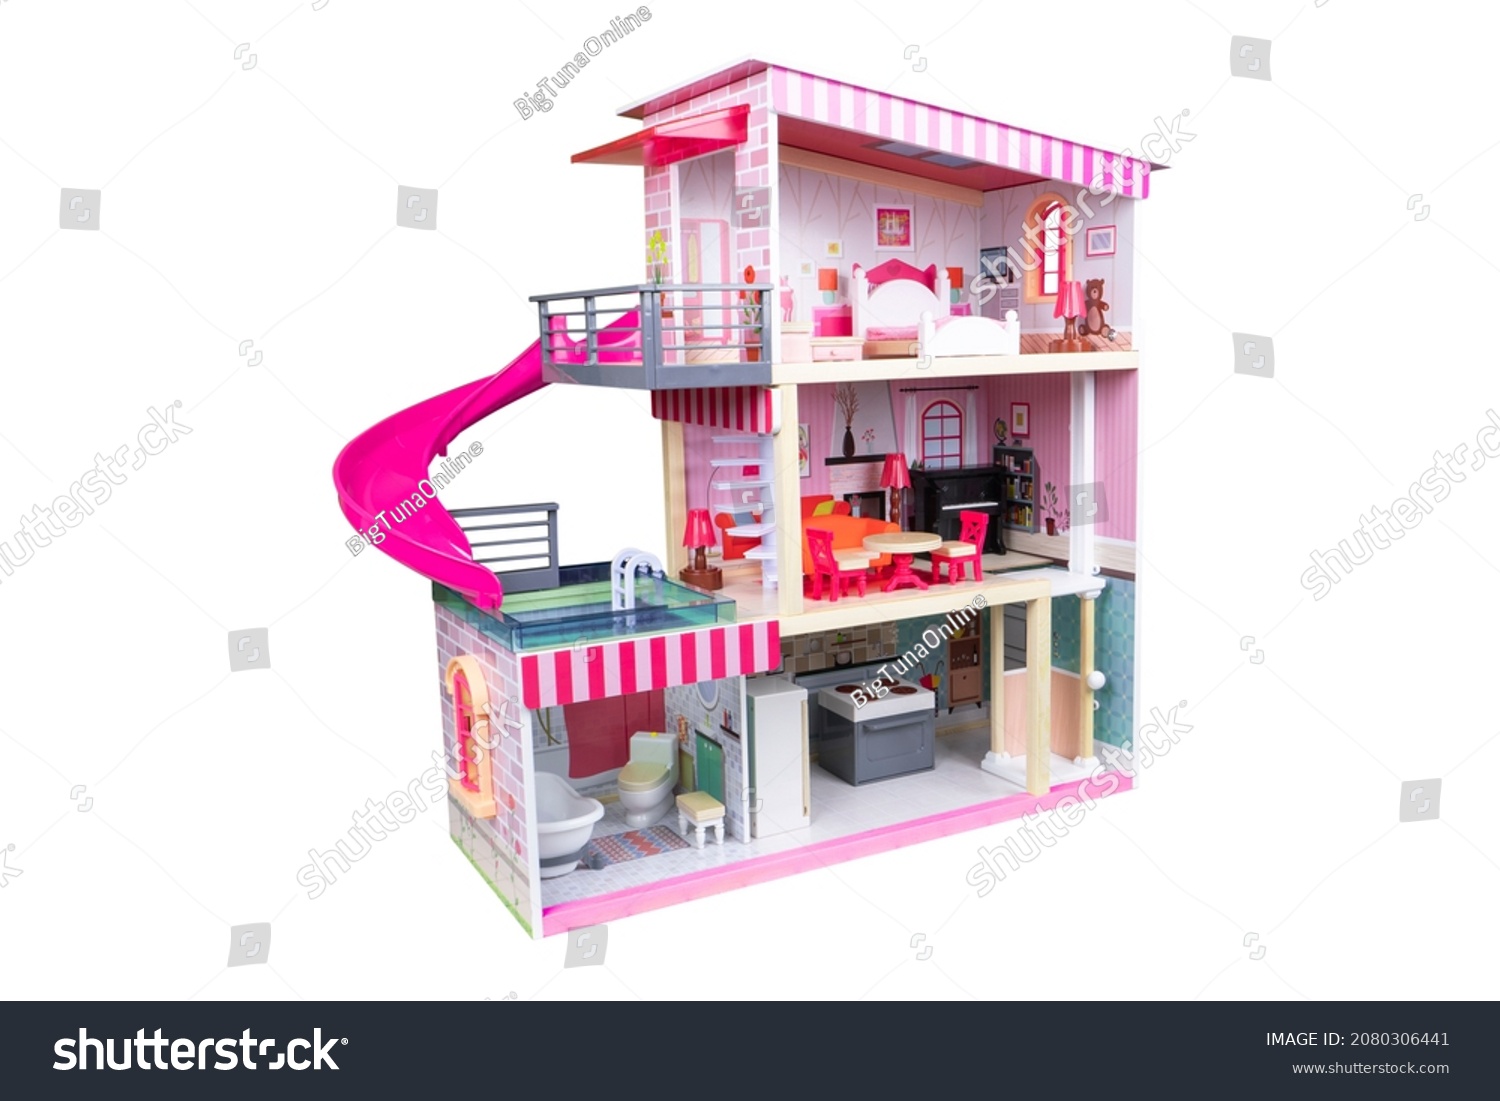 House of dolls with furniture isolated on white background. Furnished pink doll house isolated. Dollhouse. House construction with kitchen bedroom bathroom and pool interior #2080306441